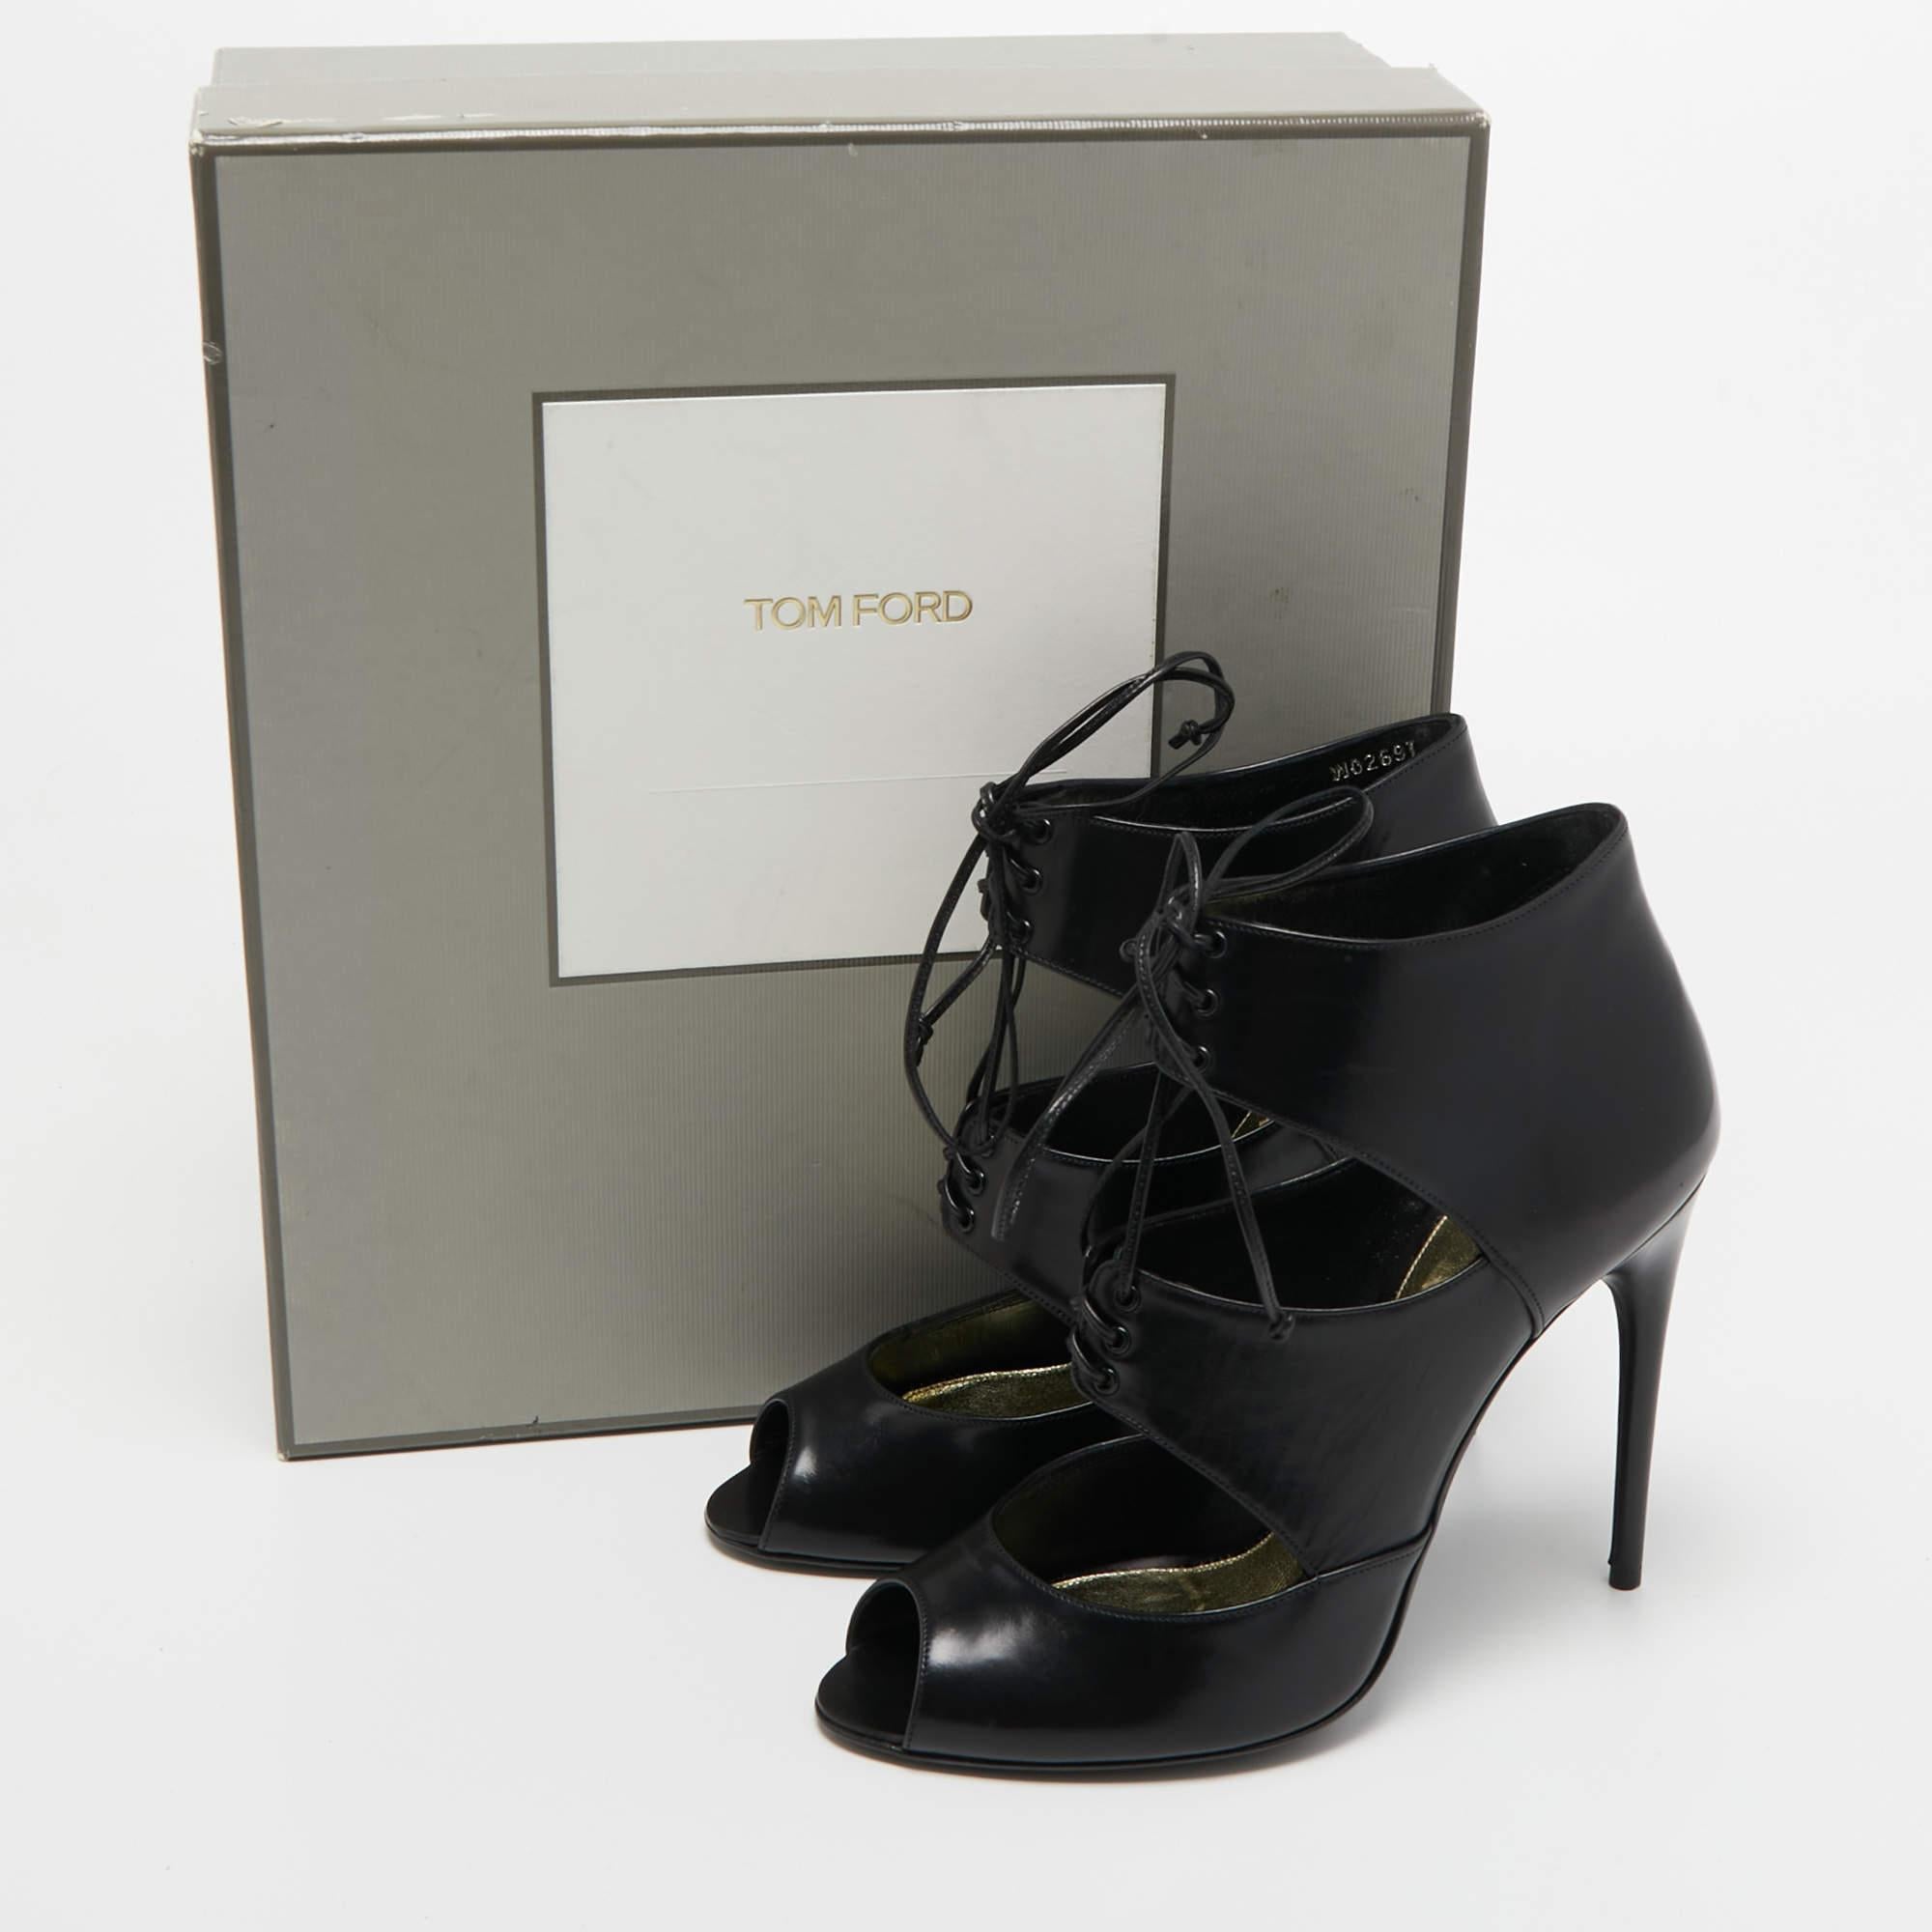 Tom Ford Black Leather Peep Toe Ankle Booties Size 39.5 For Sale 5